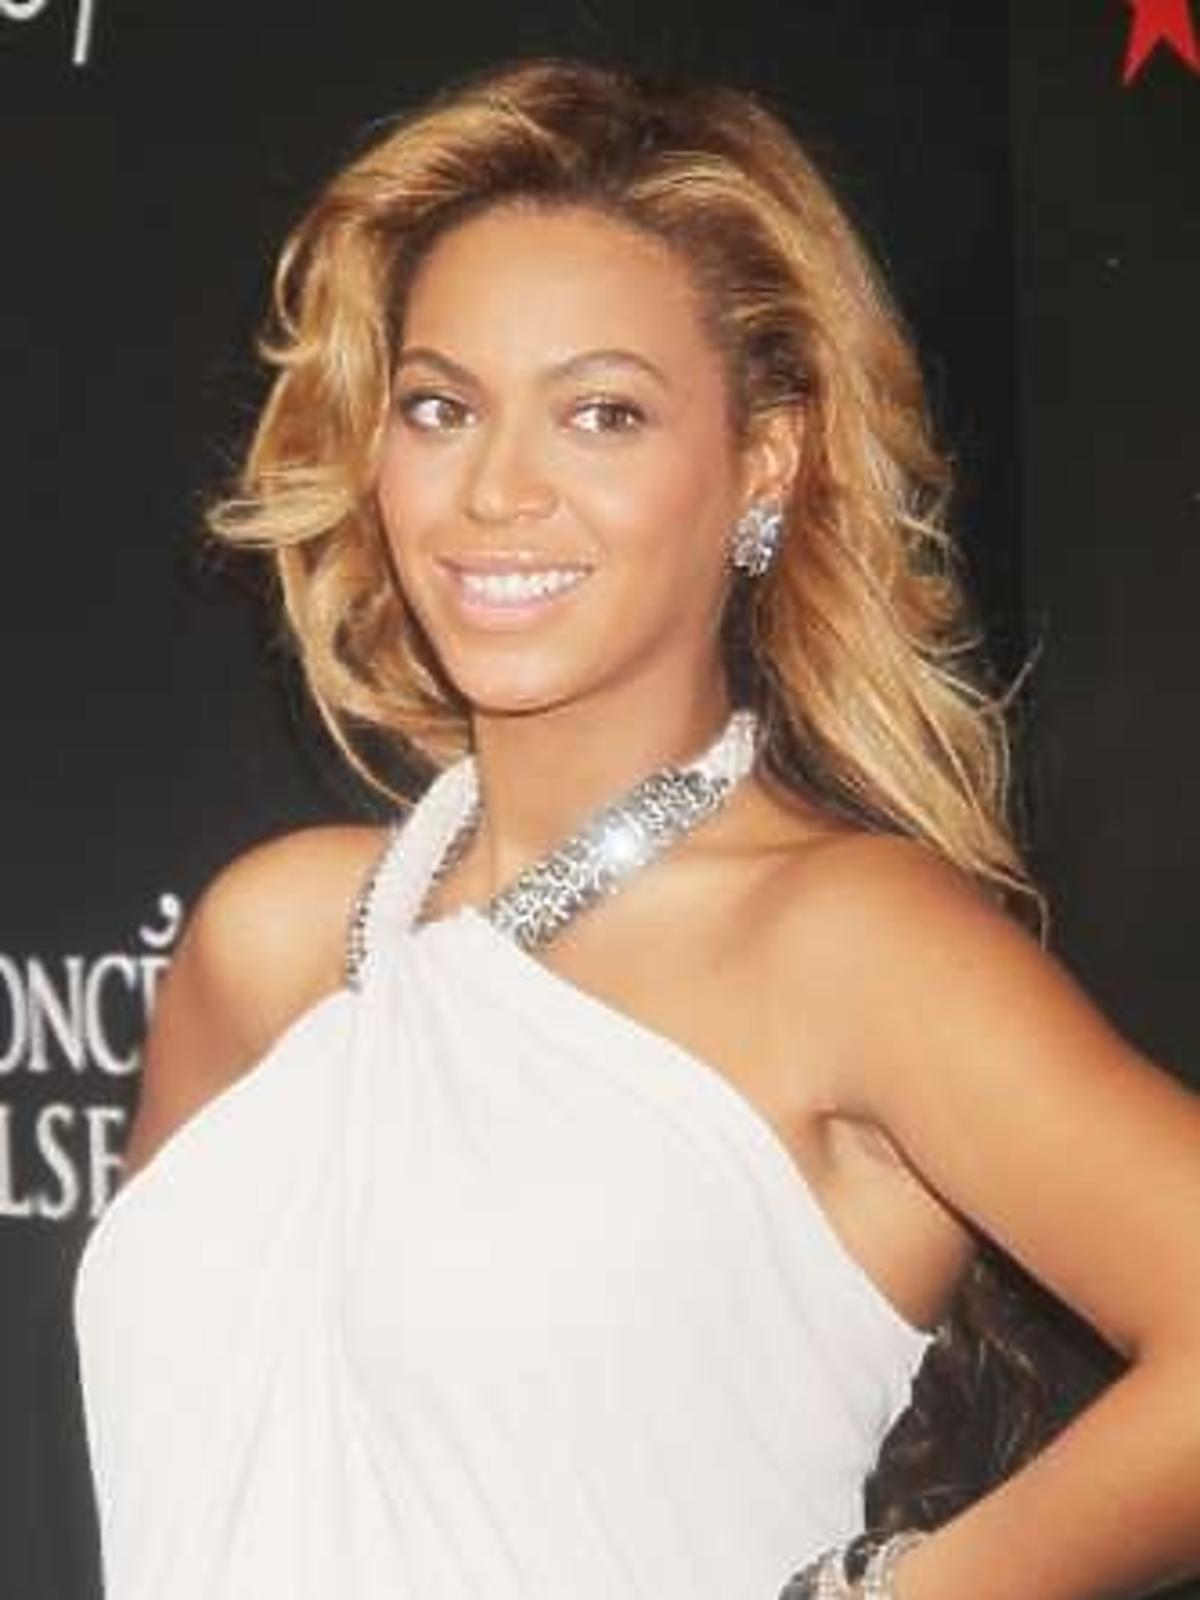 ALLONS_1189721_preview_Beyonce Knowles 05.jpg